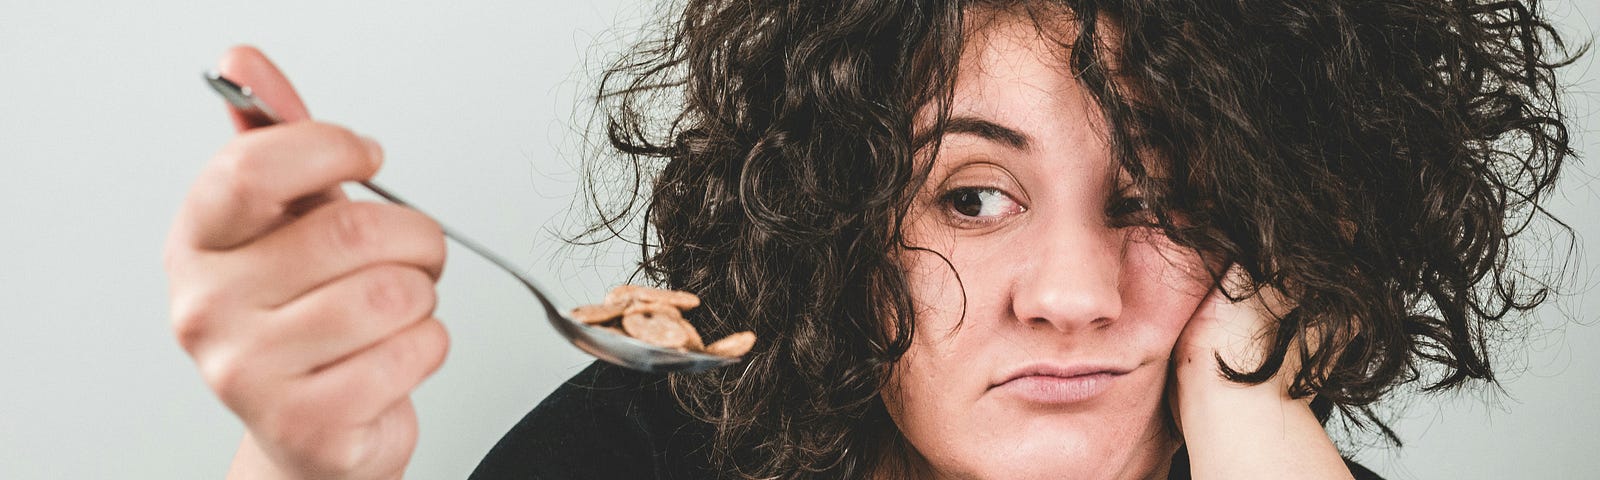 A woman with curly hair looks tired or bored as she holds a spoon over a bowl of cereal, resting her head on her hand.